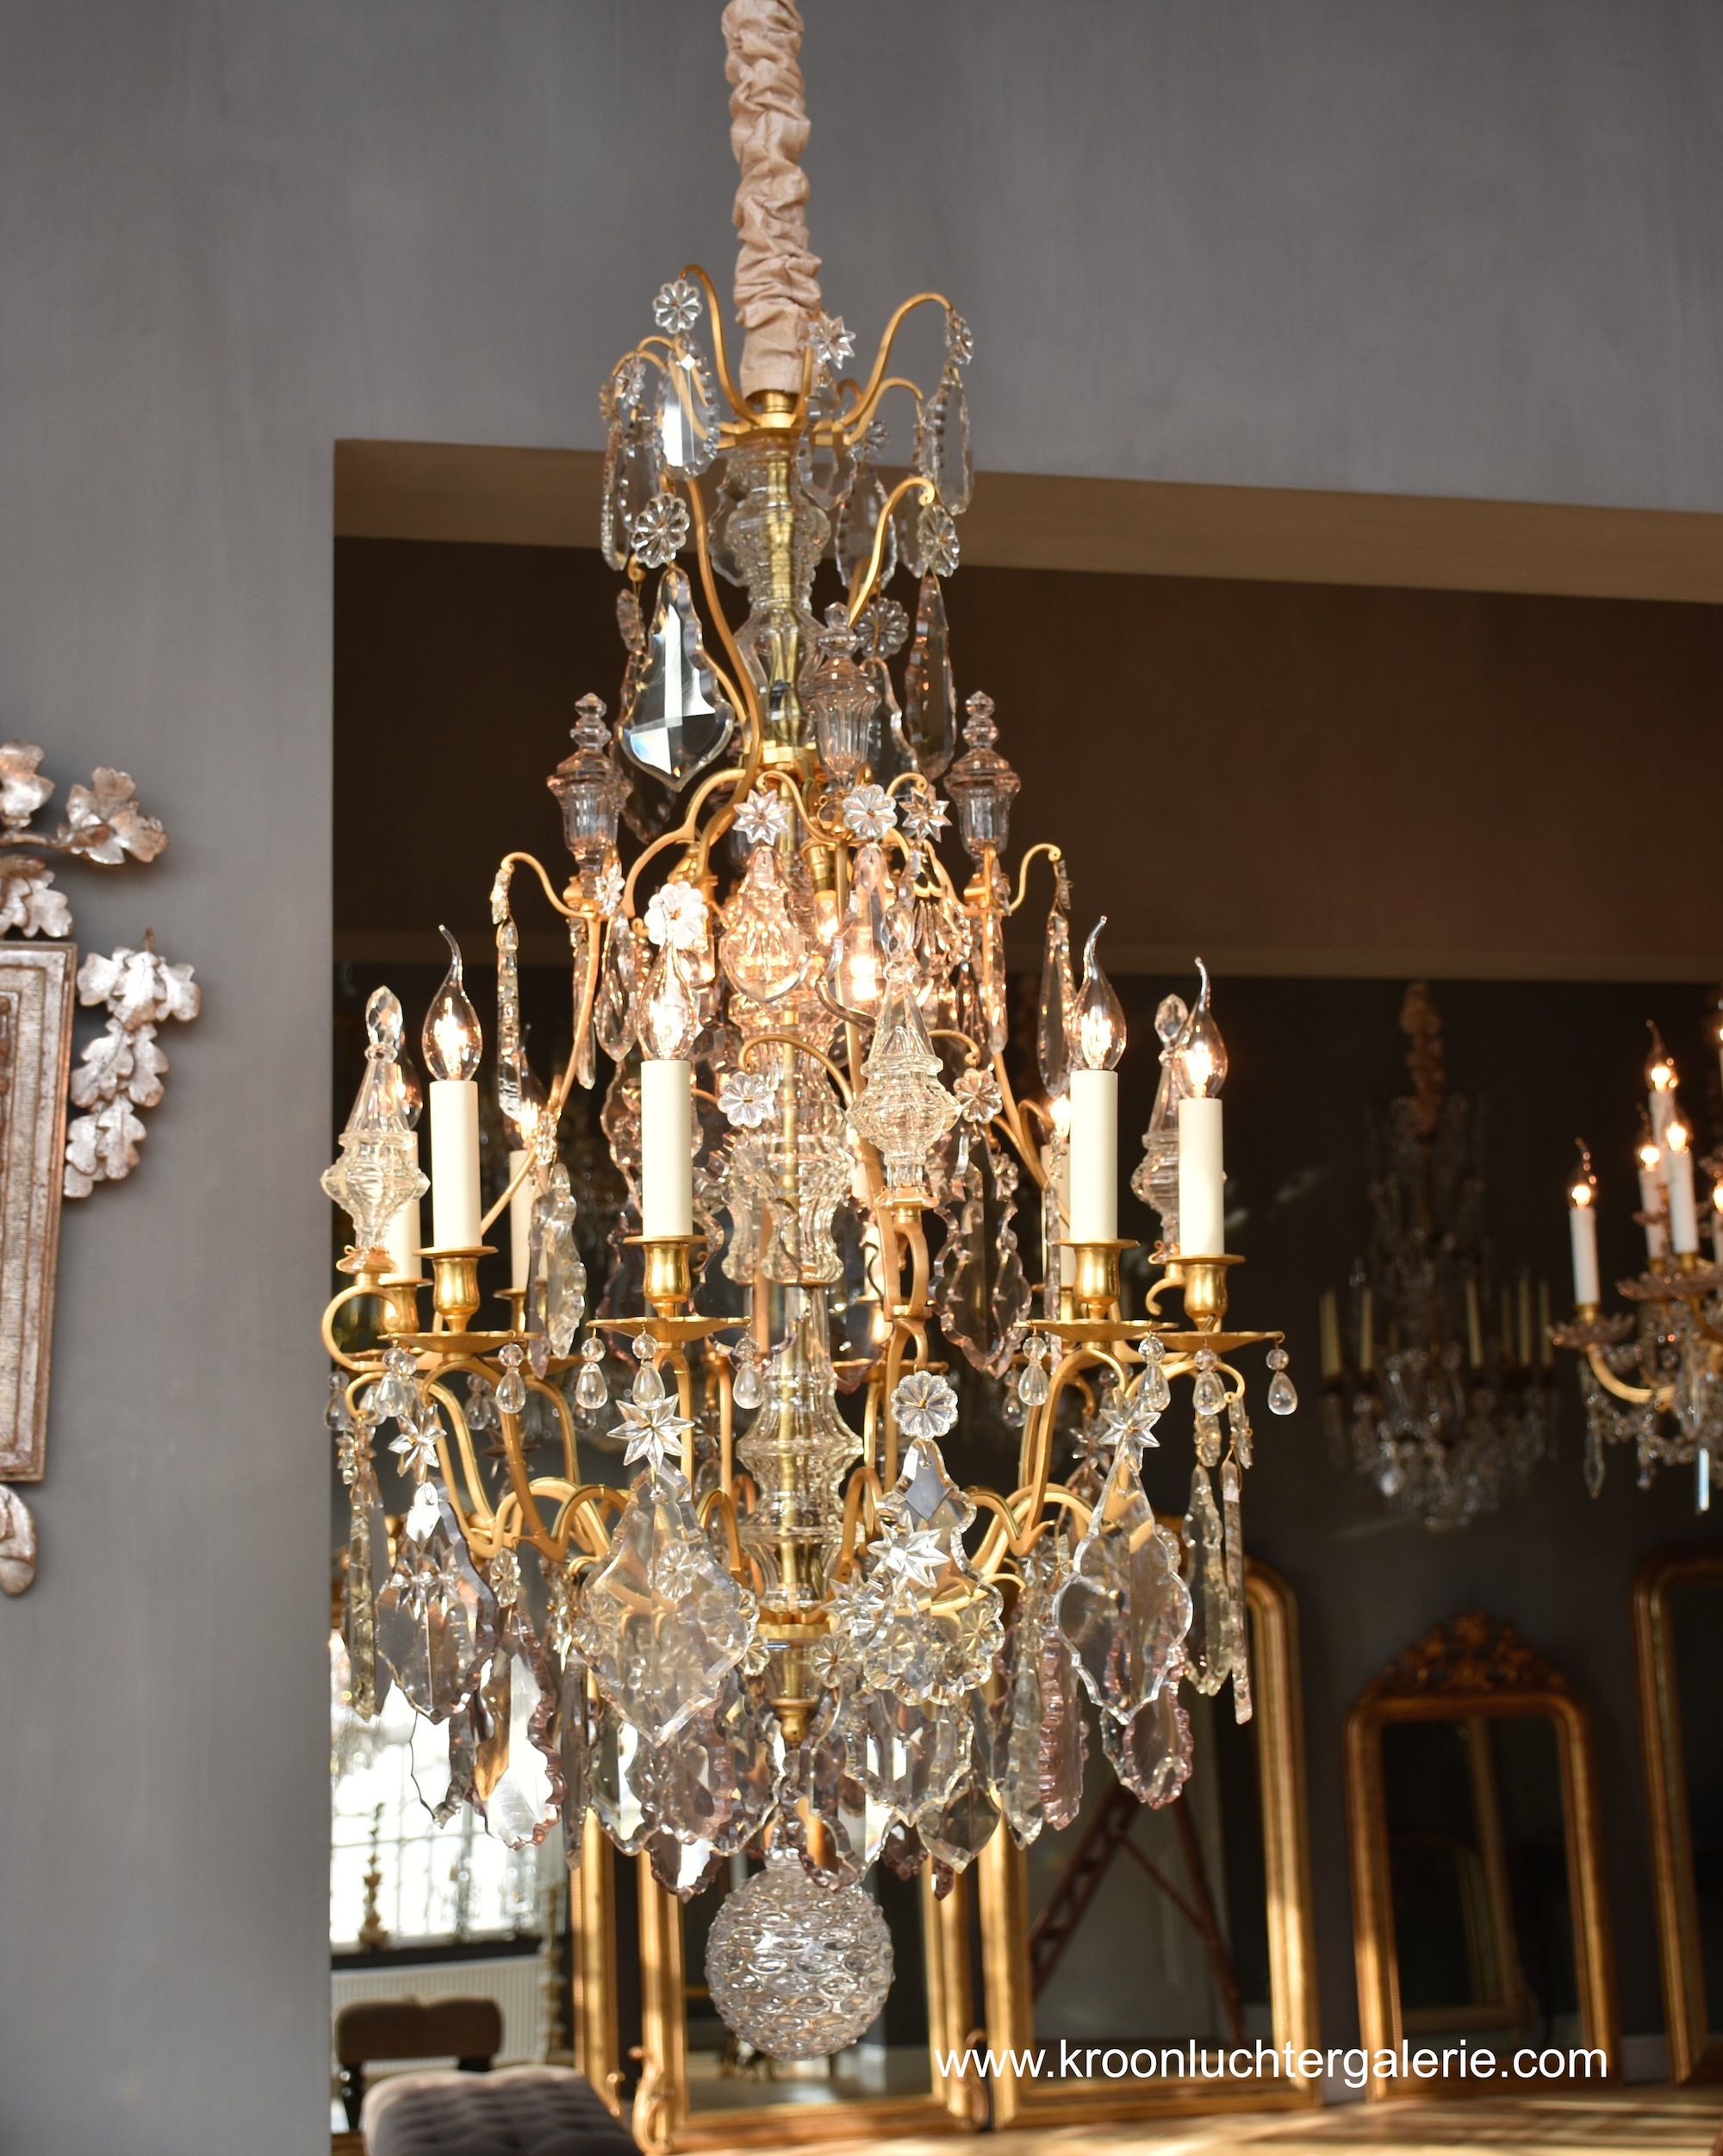 French chandelier with 12 light in the style of Louis XV